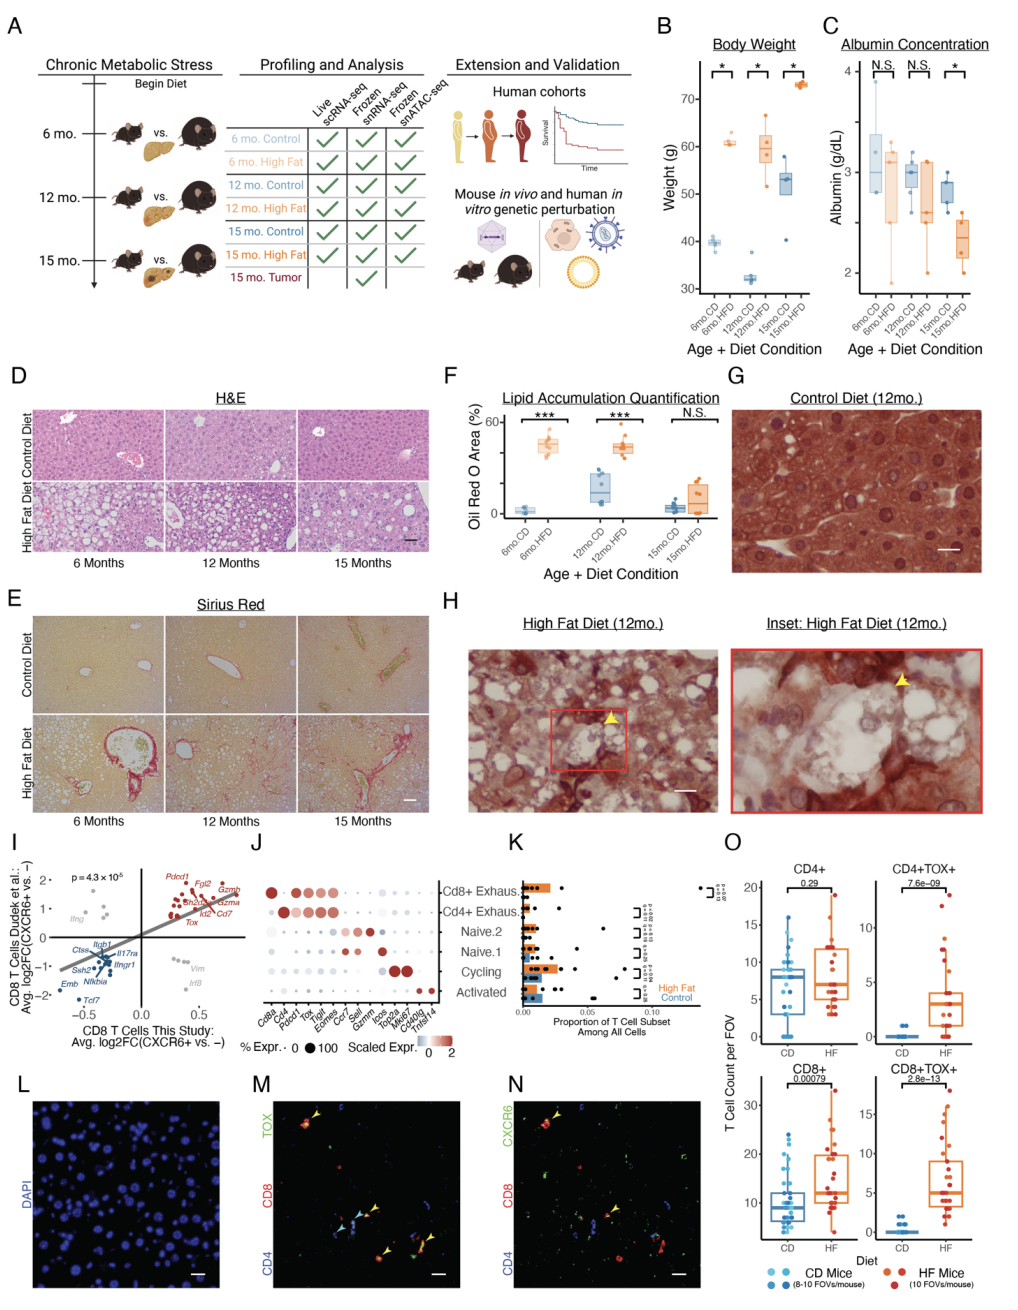 Chronic metabolic stress drives developmental programs and loss of tissue functions in non-transformed liver that mirror tumor states and stratify survival